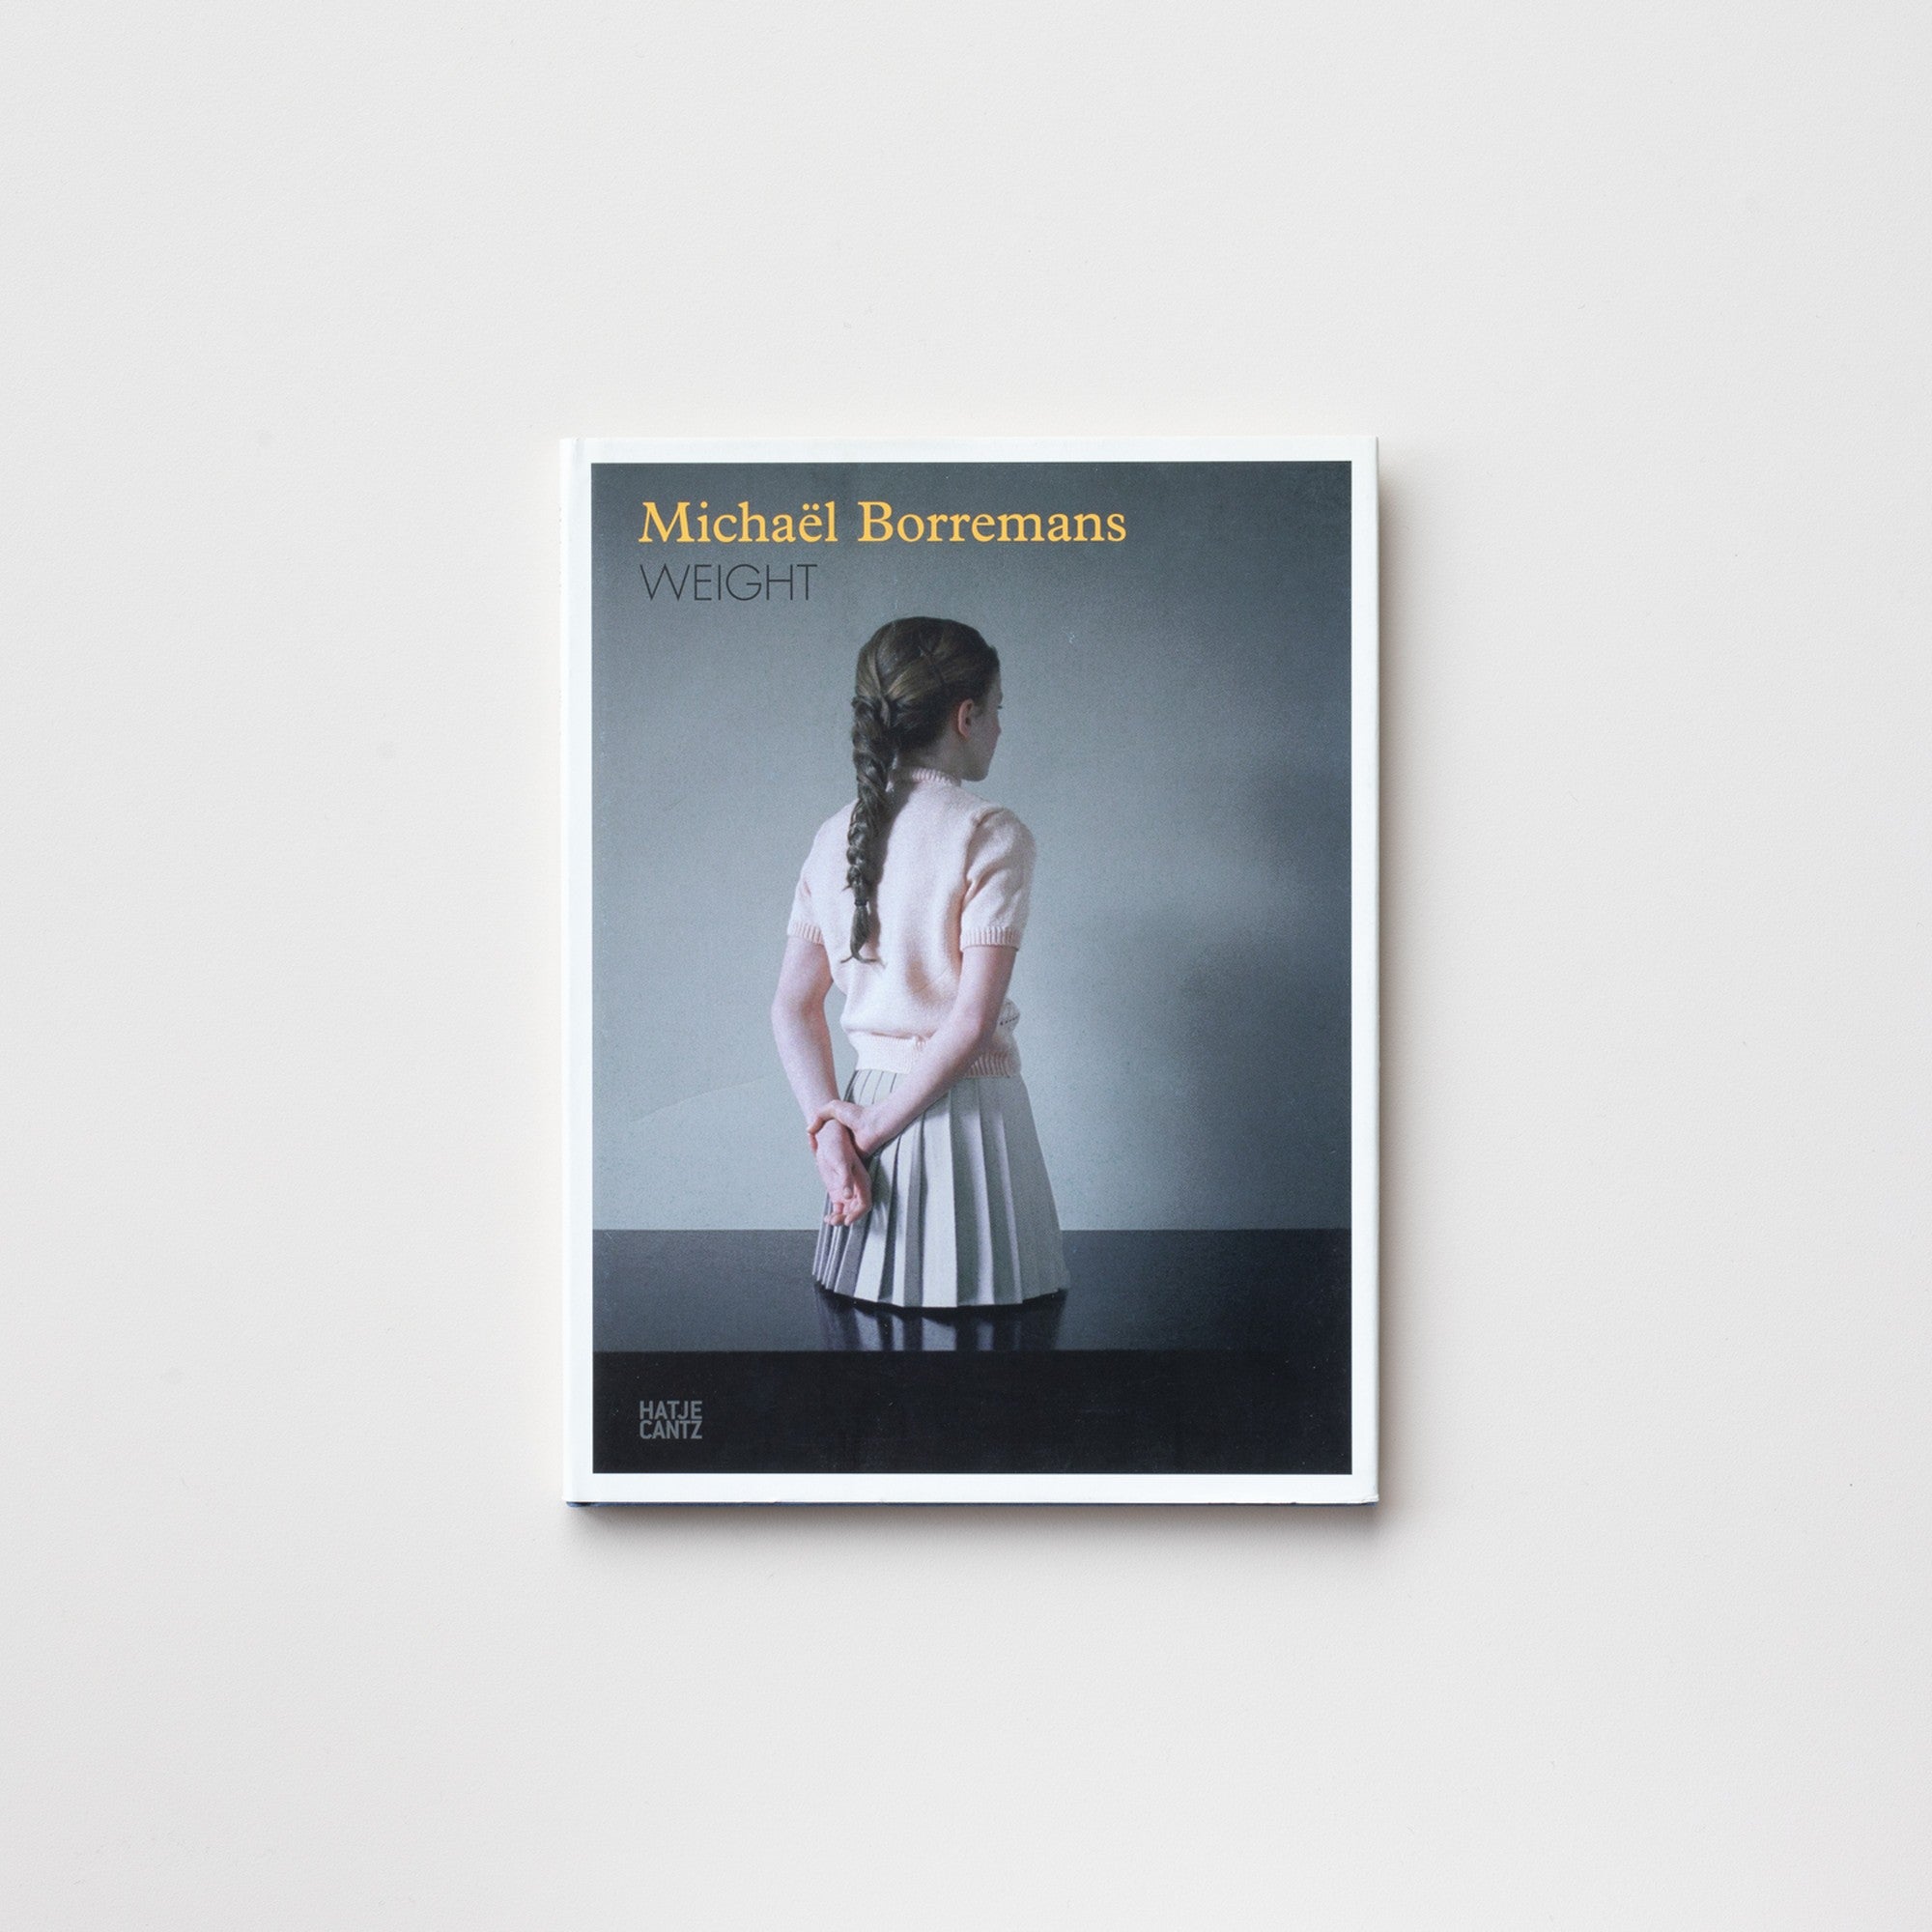 Signed) Weight by Michaël Borremans – IACK